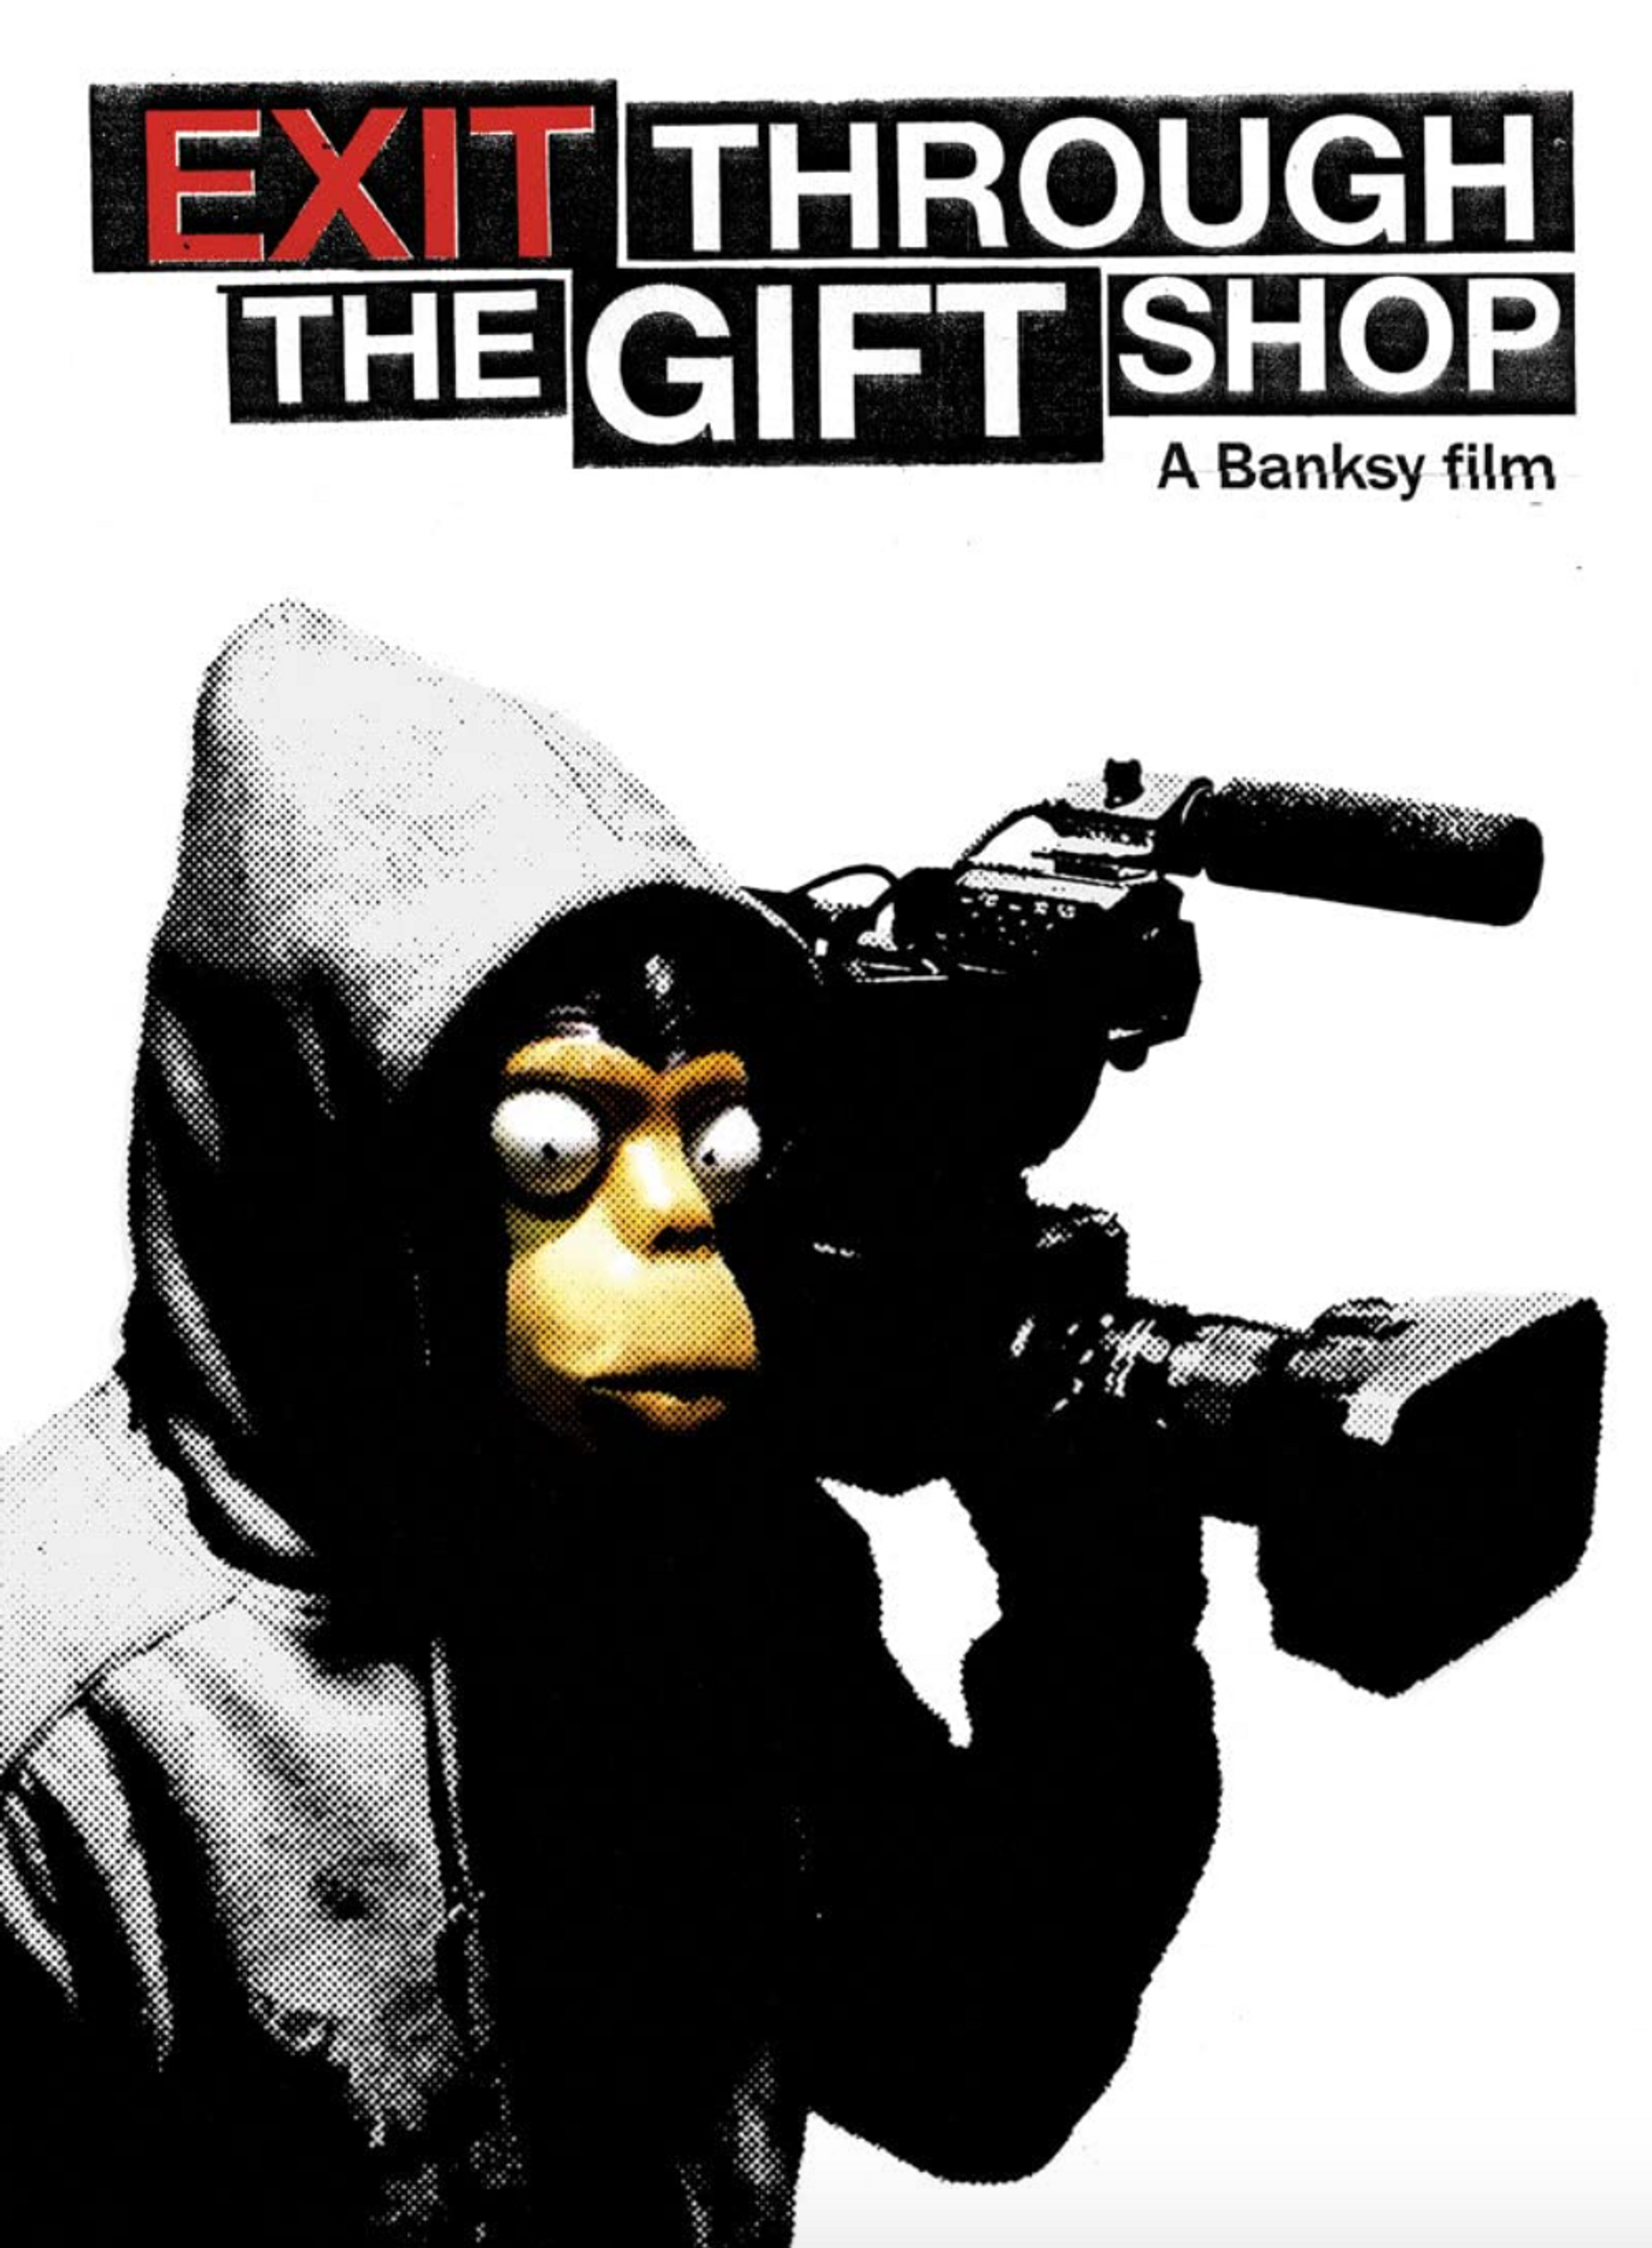 Exit Through The Gift Shop Film Poster by Banksy - MyArtBroker